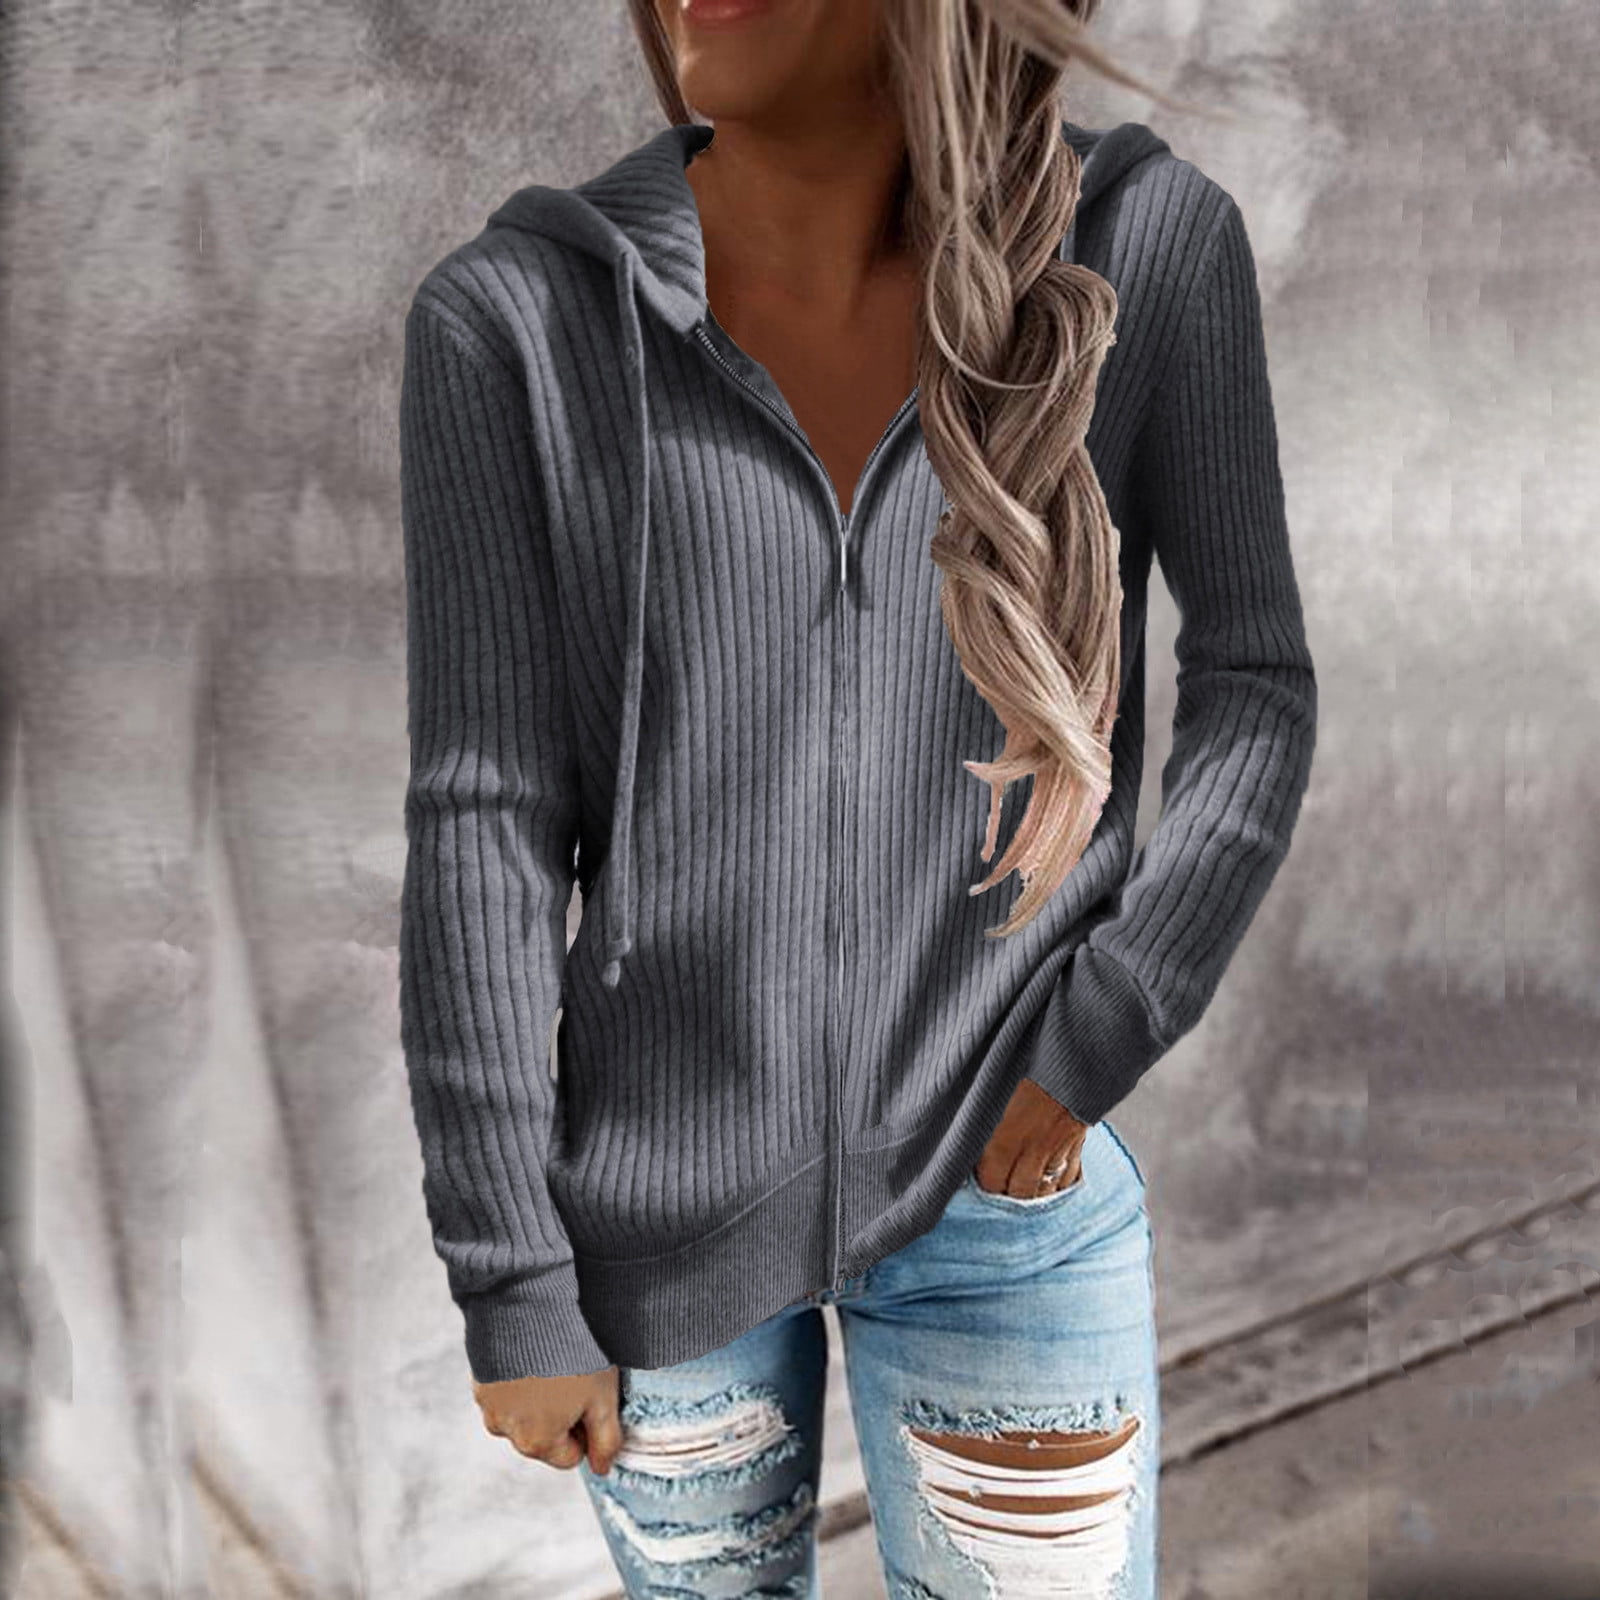 Farysays Women's 2022 Casual Hoodies V Neck Lace Up Criss Cross Long Sleeve Drawstring Pullover Sweatshirts Tops